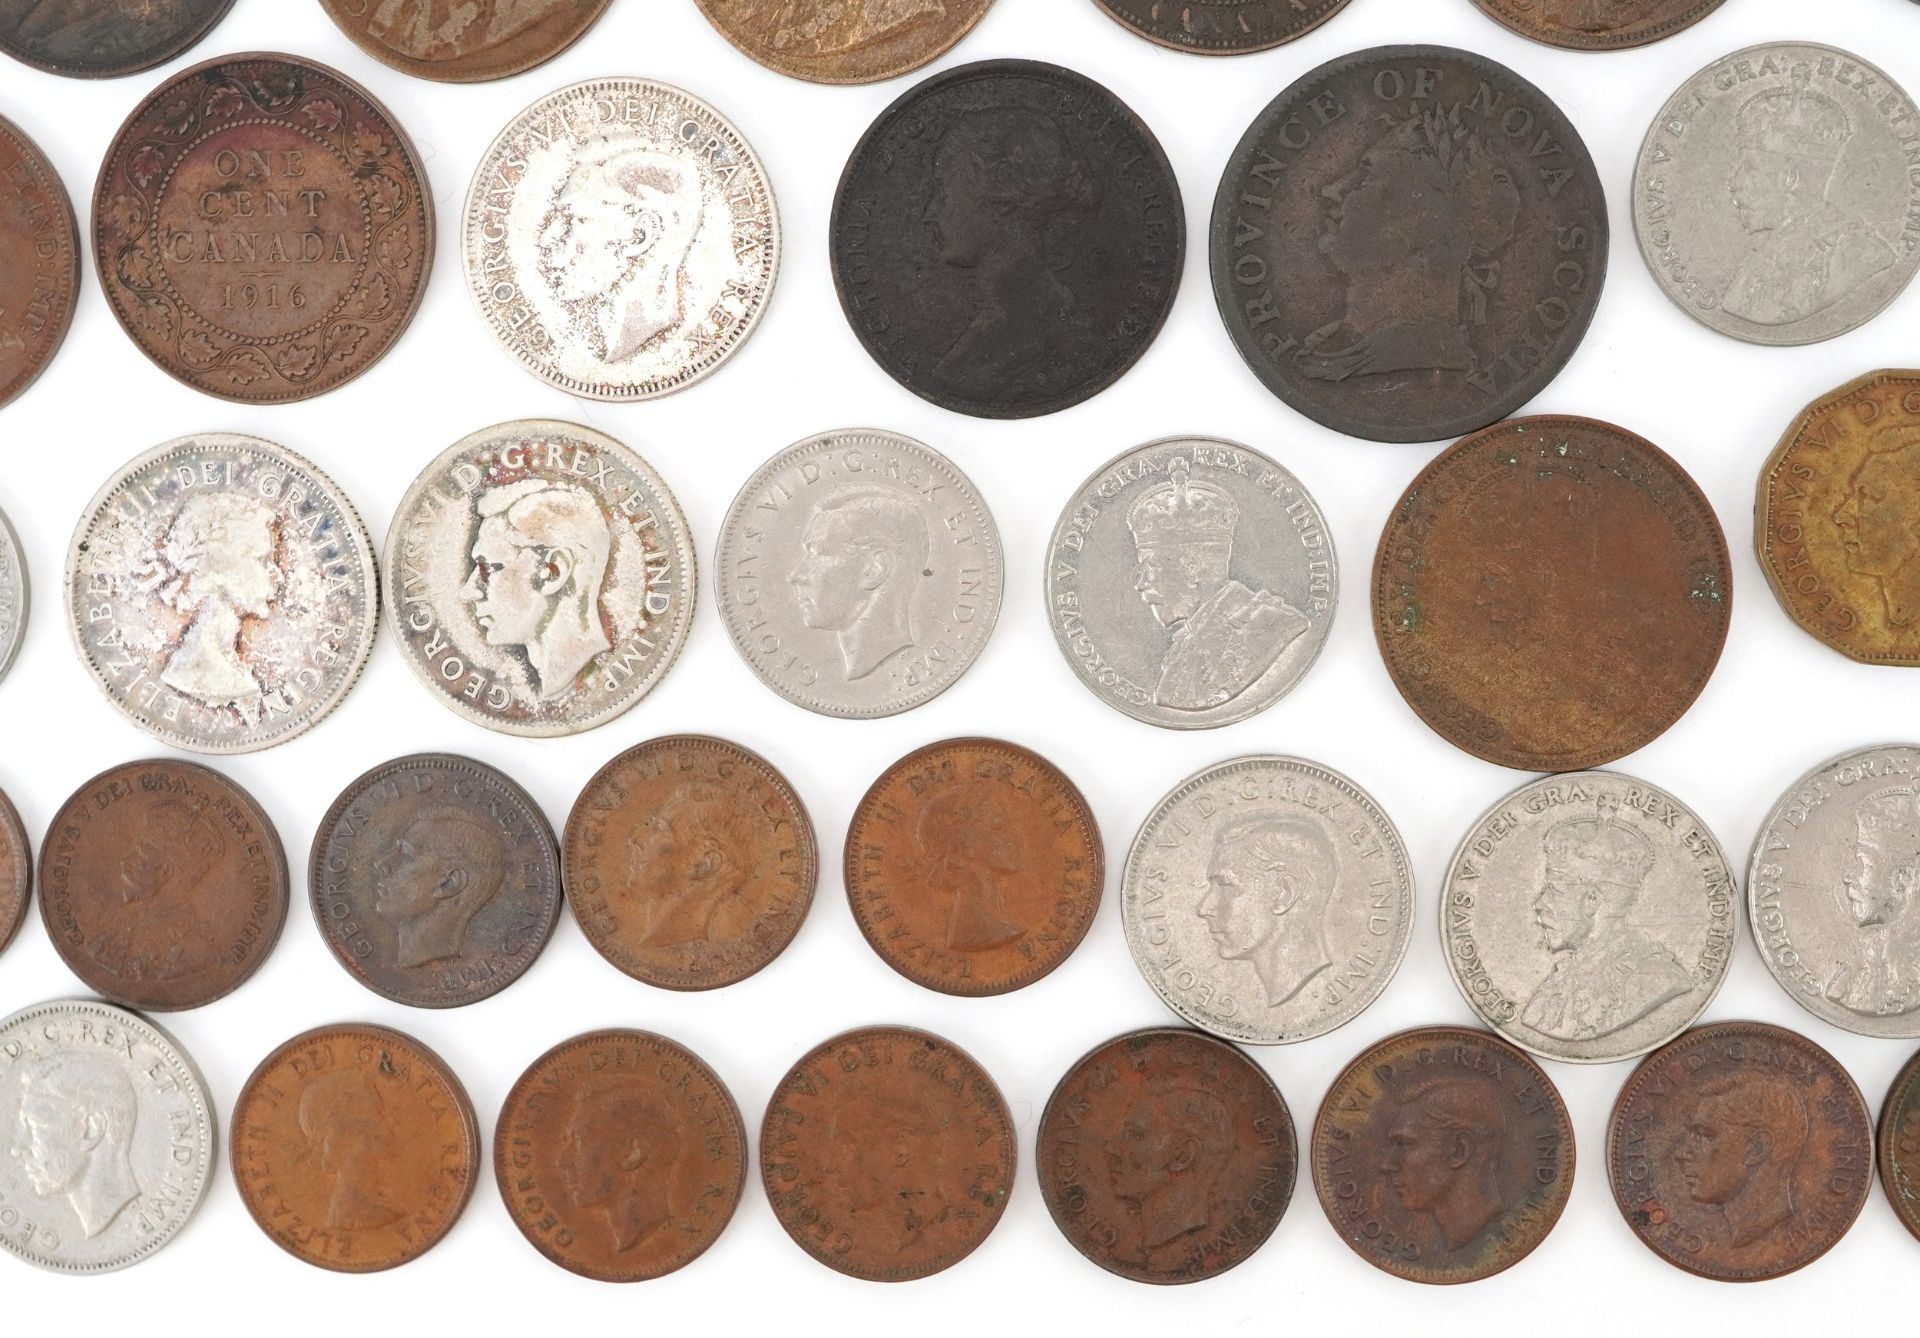 Early 19th century and later Canadian coinage and tokens including Nova Scotia one penny tokens, - Image 19 of 20